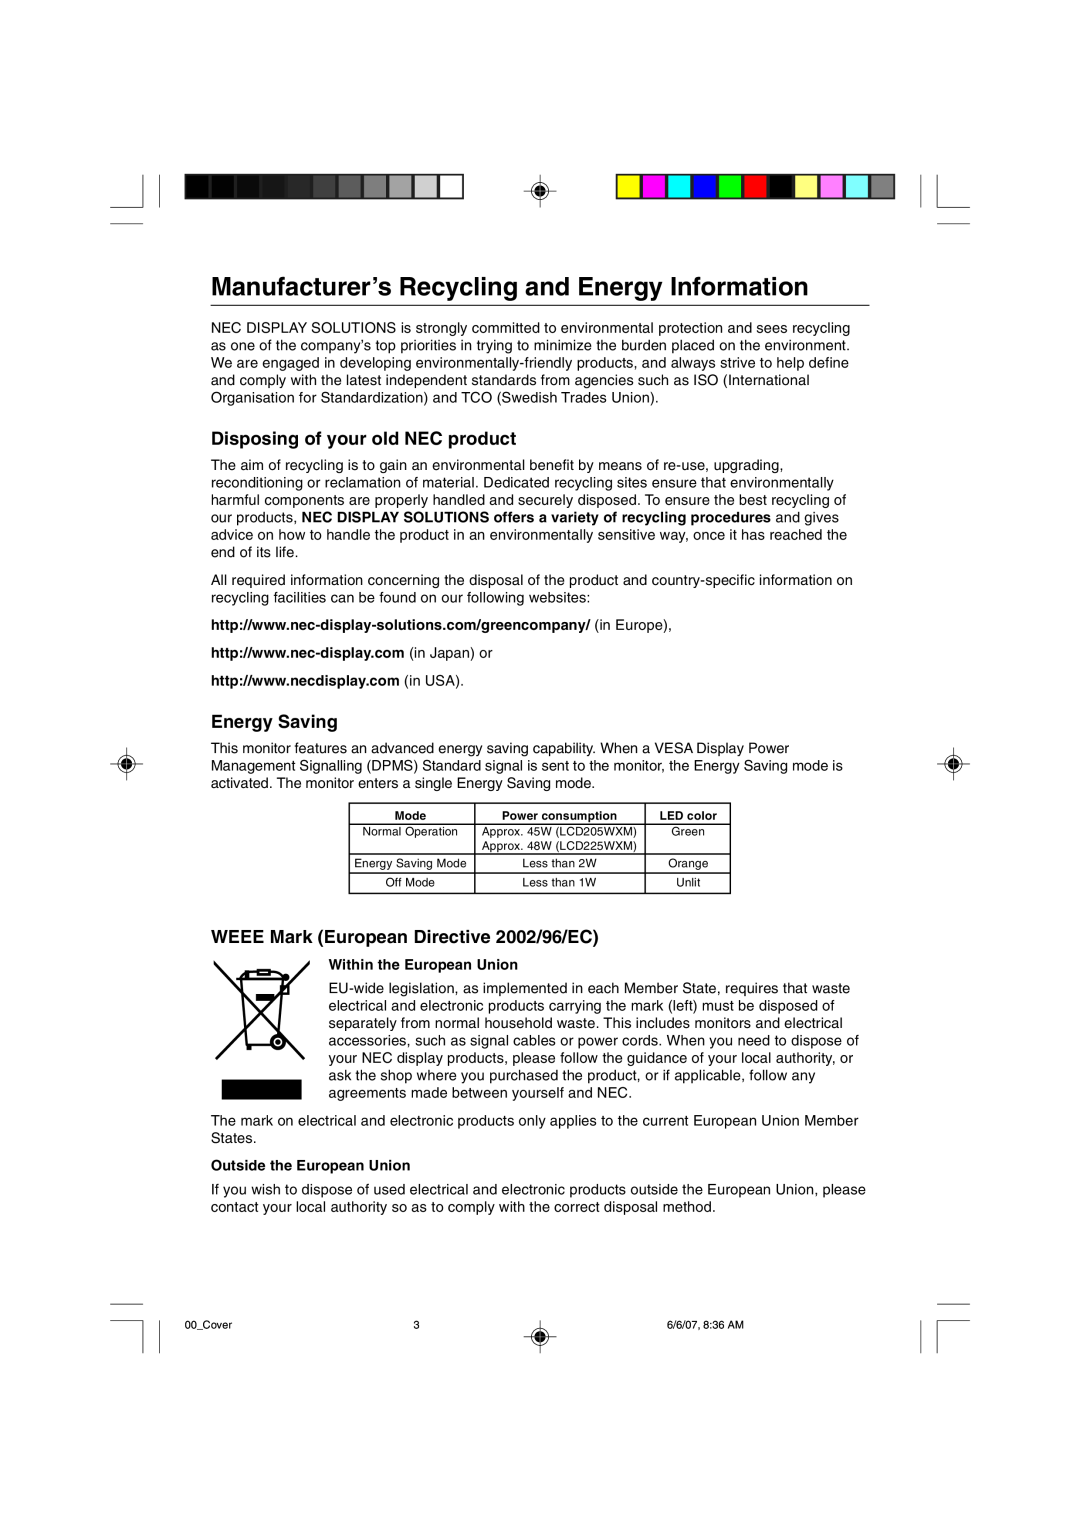 NEC LCD225WXM user manual ManufacturerÕs Recycling and Energy Information, Disposing of your old NEC product, Energy Saving 